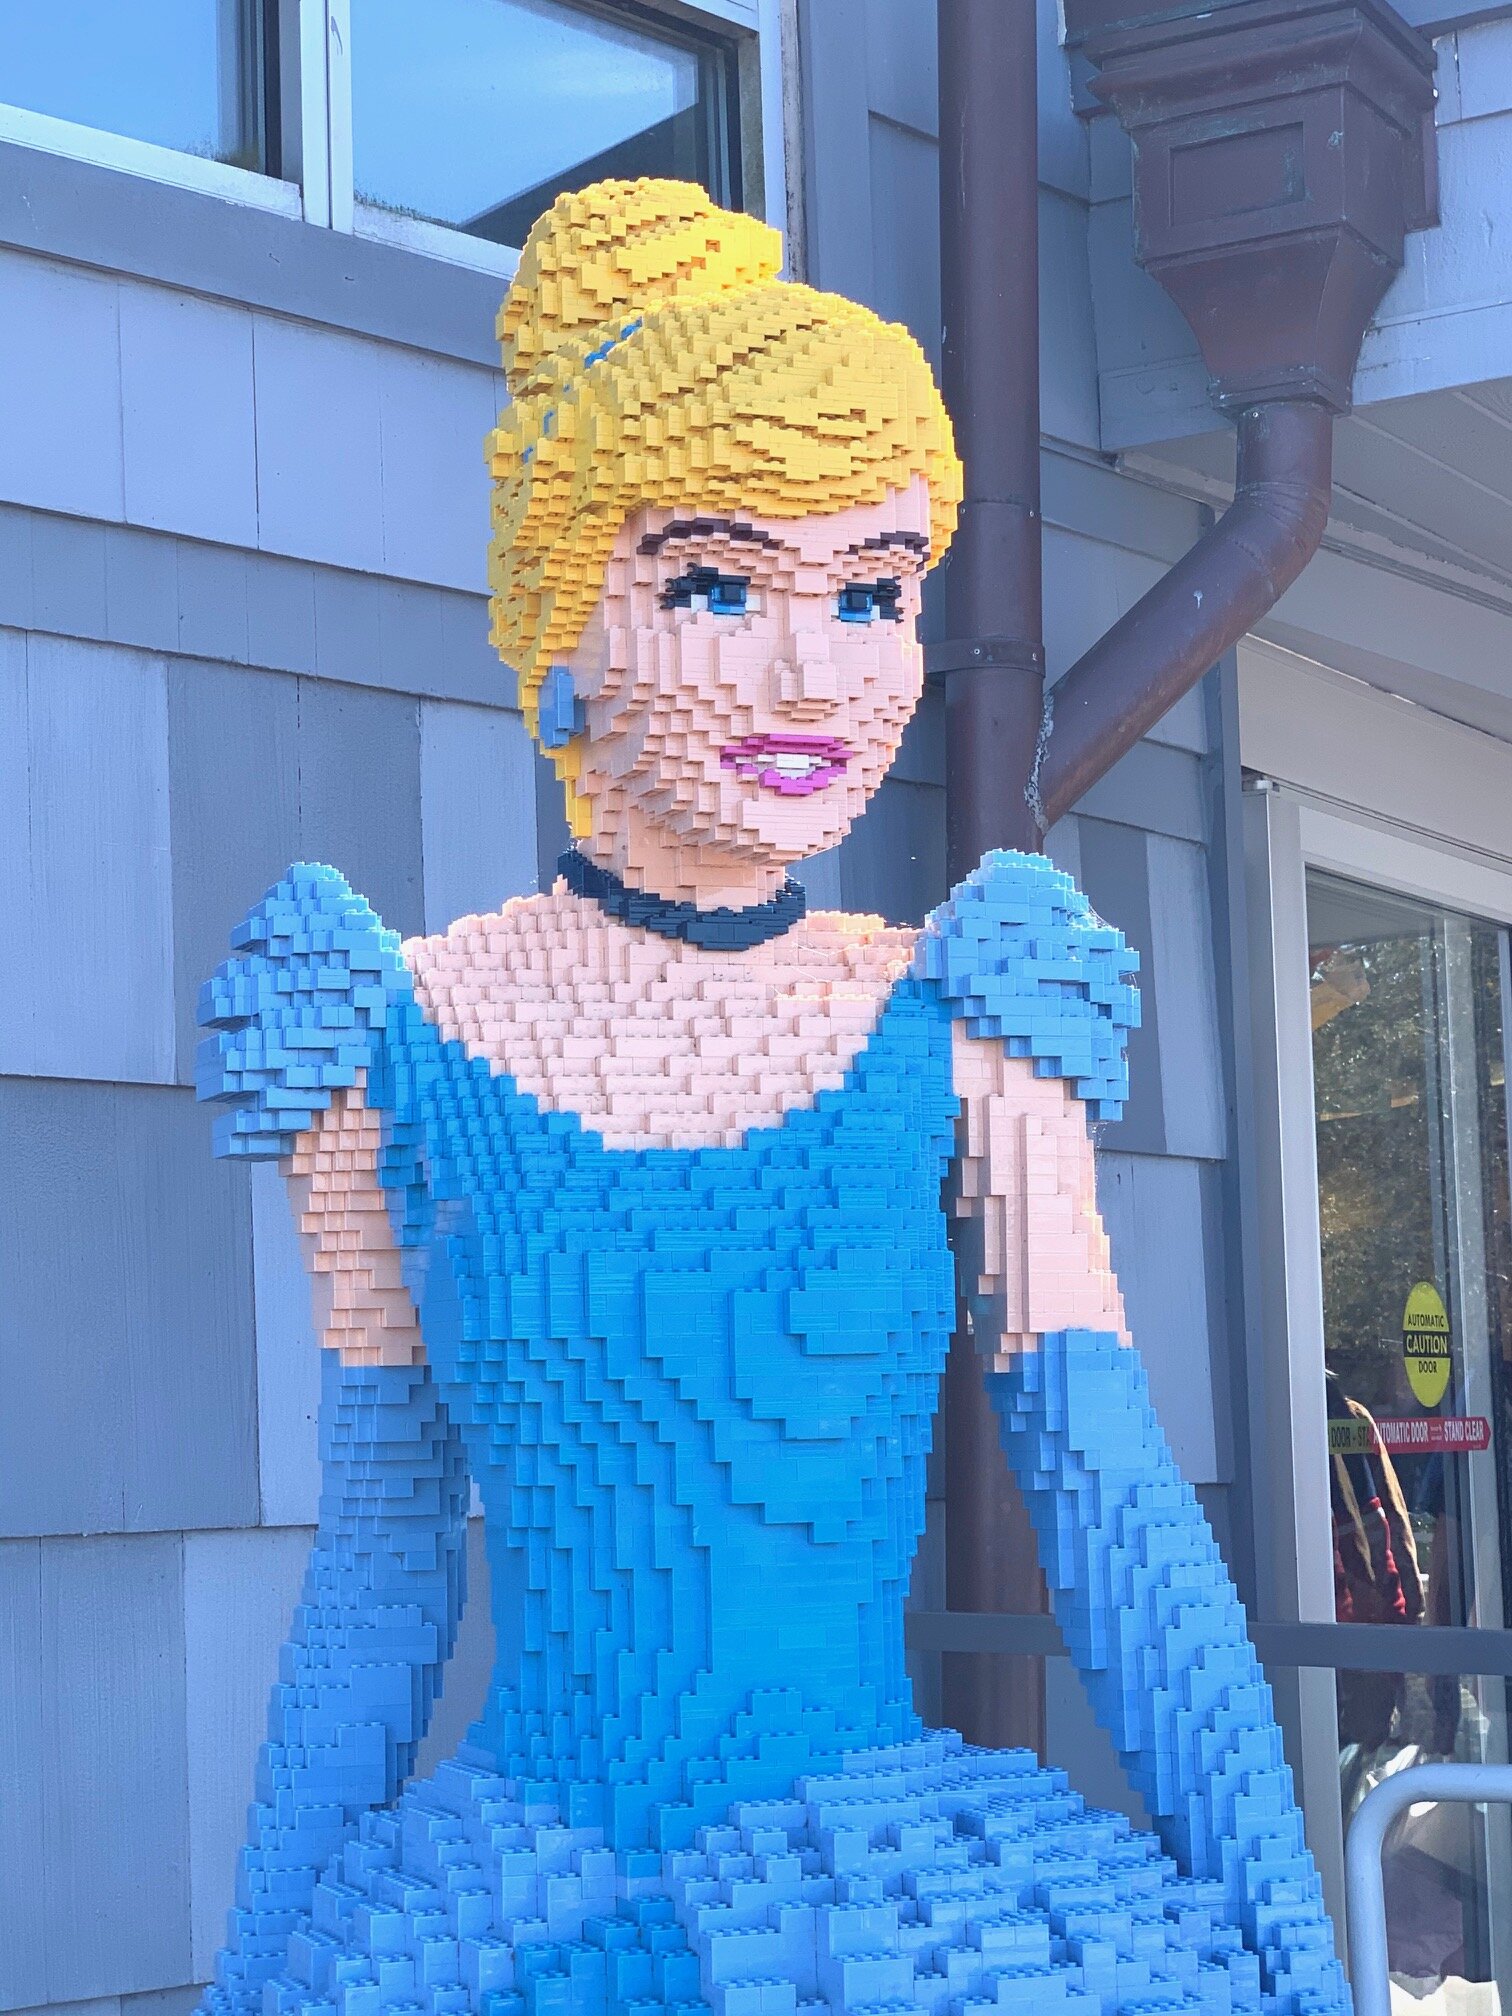  LEGO Cinderella has over 36,000 lego blocks and the inside is partially solid with LEGOs as well,  